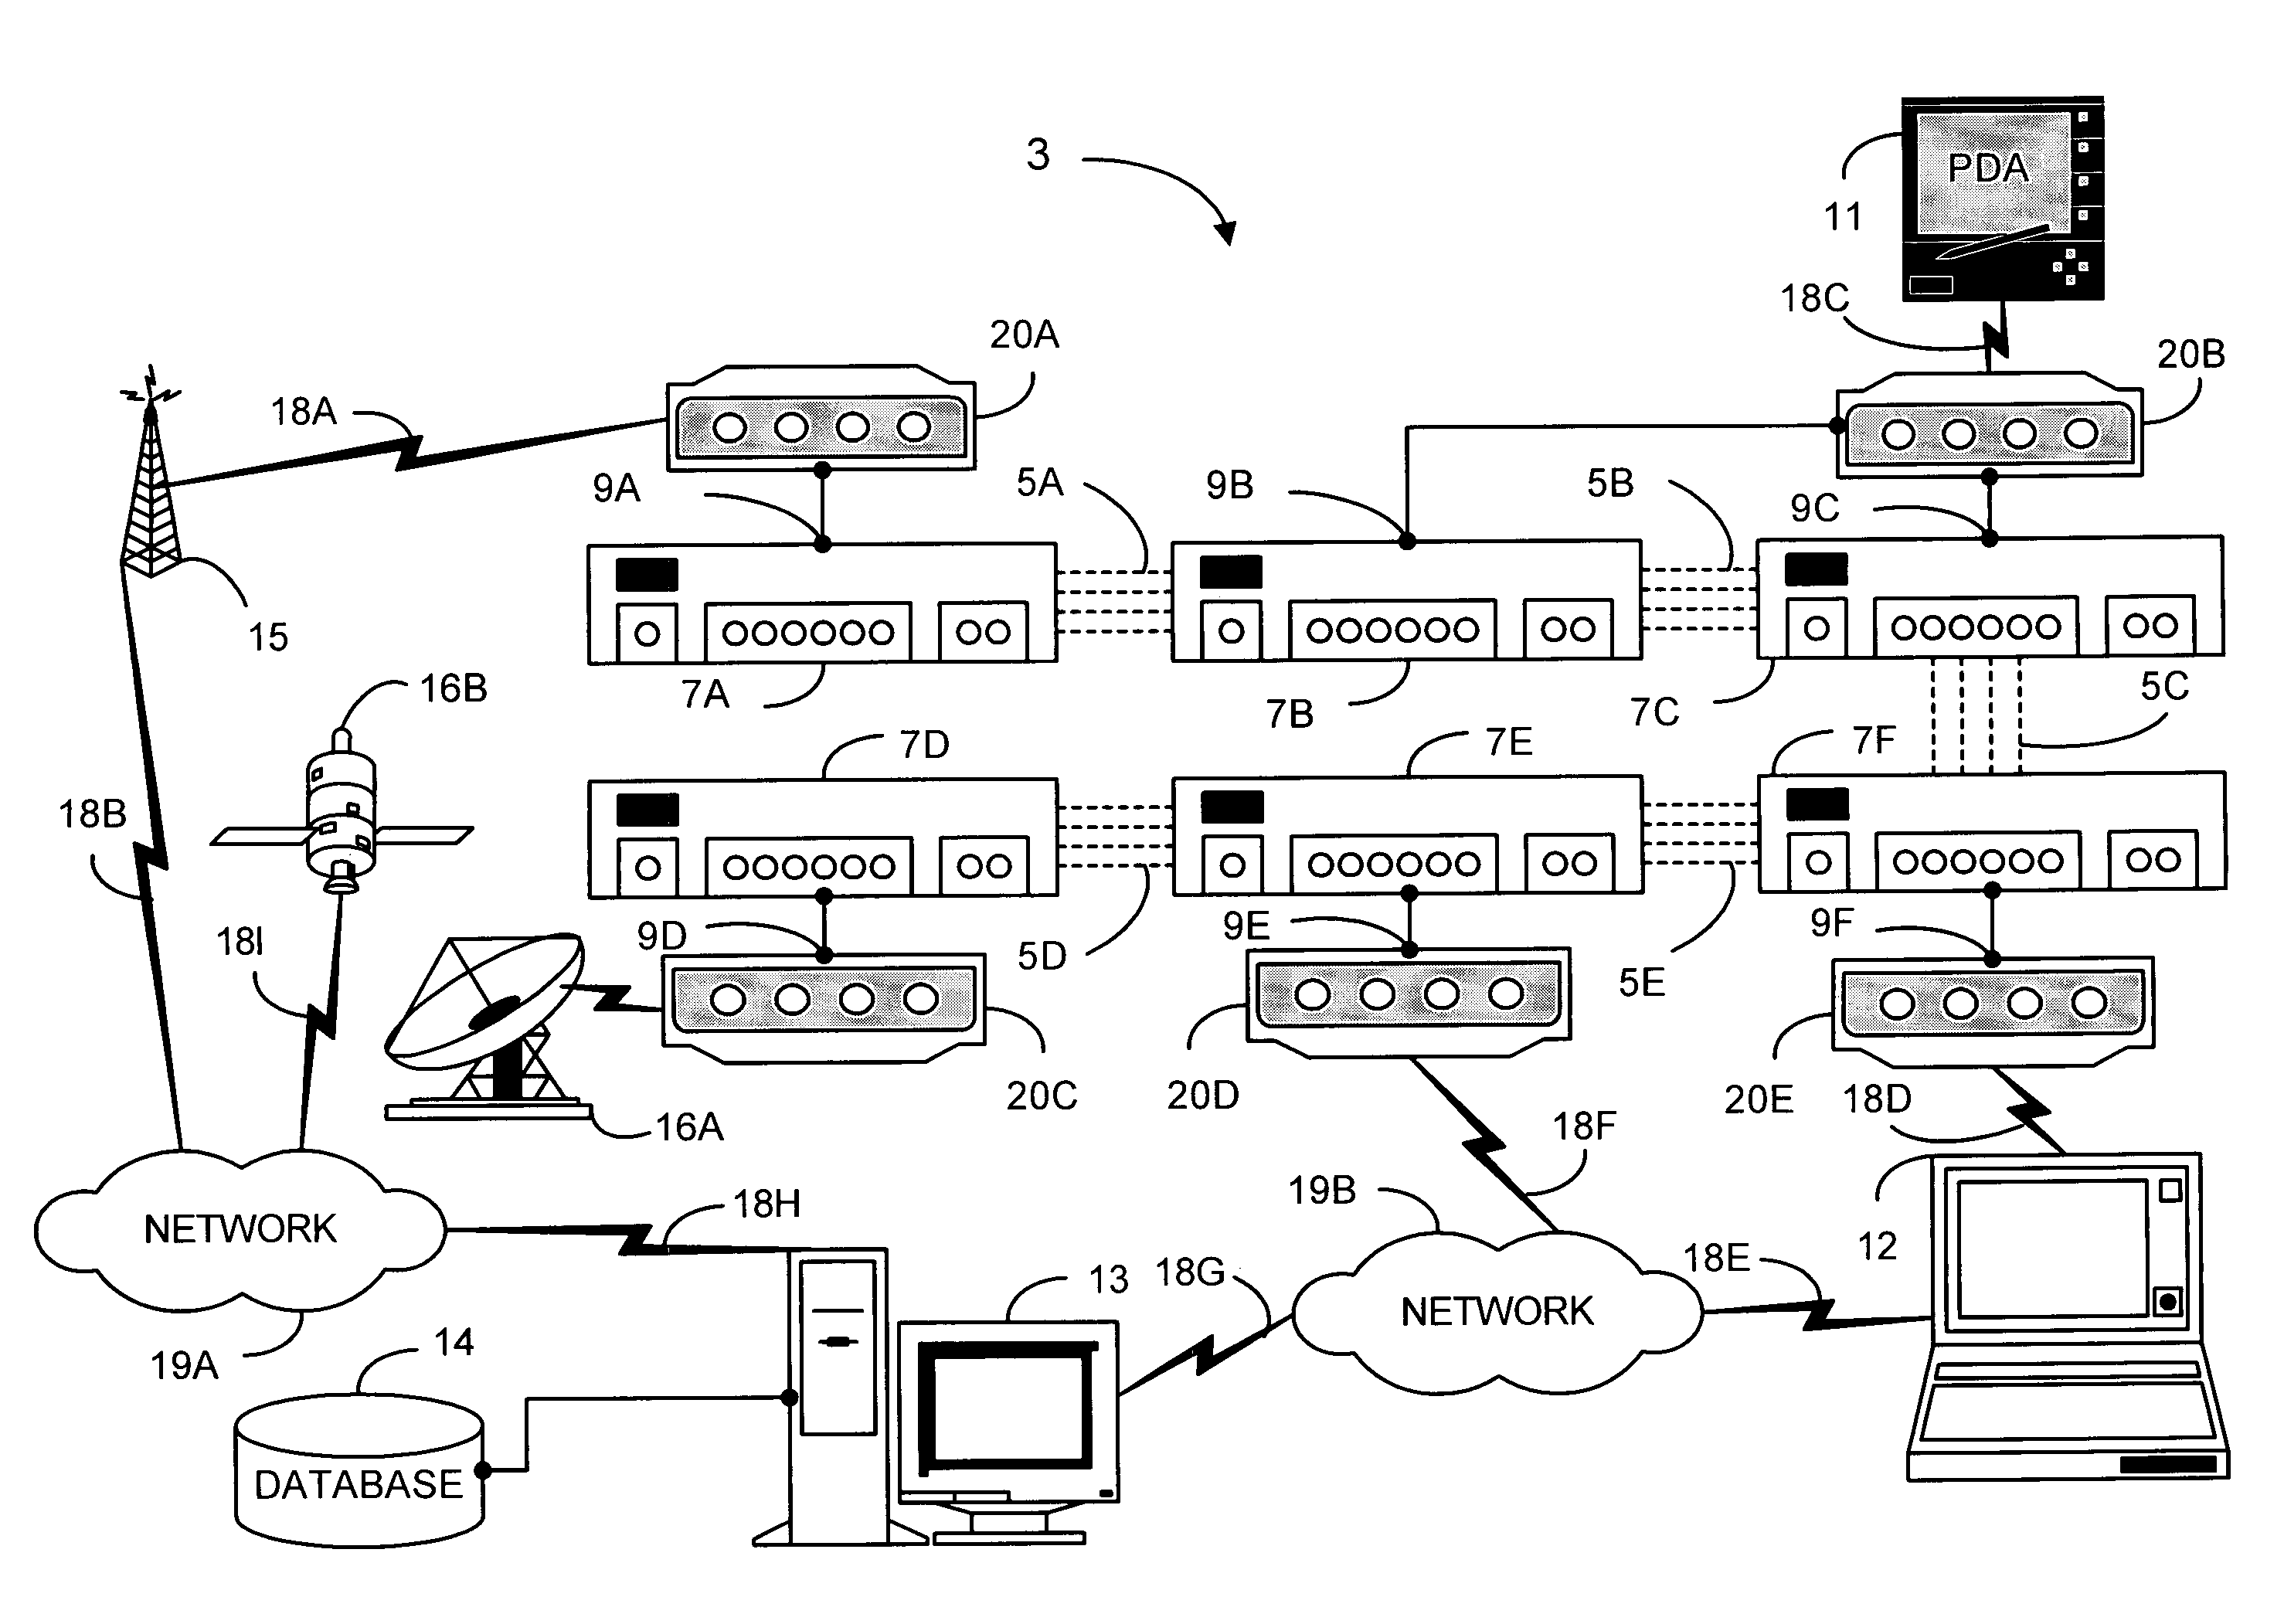 System and method for providing remote monitoring of voltage power transmission and distribution devices